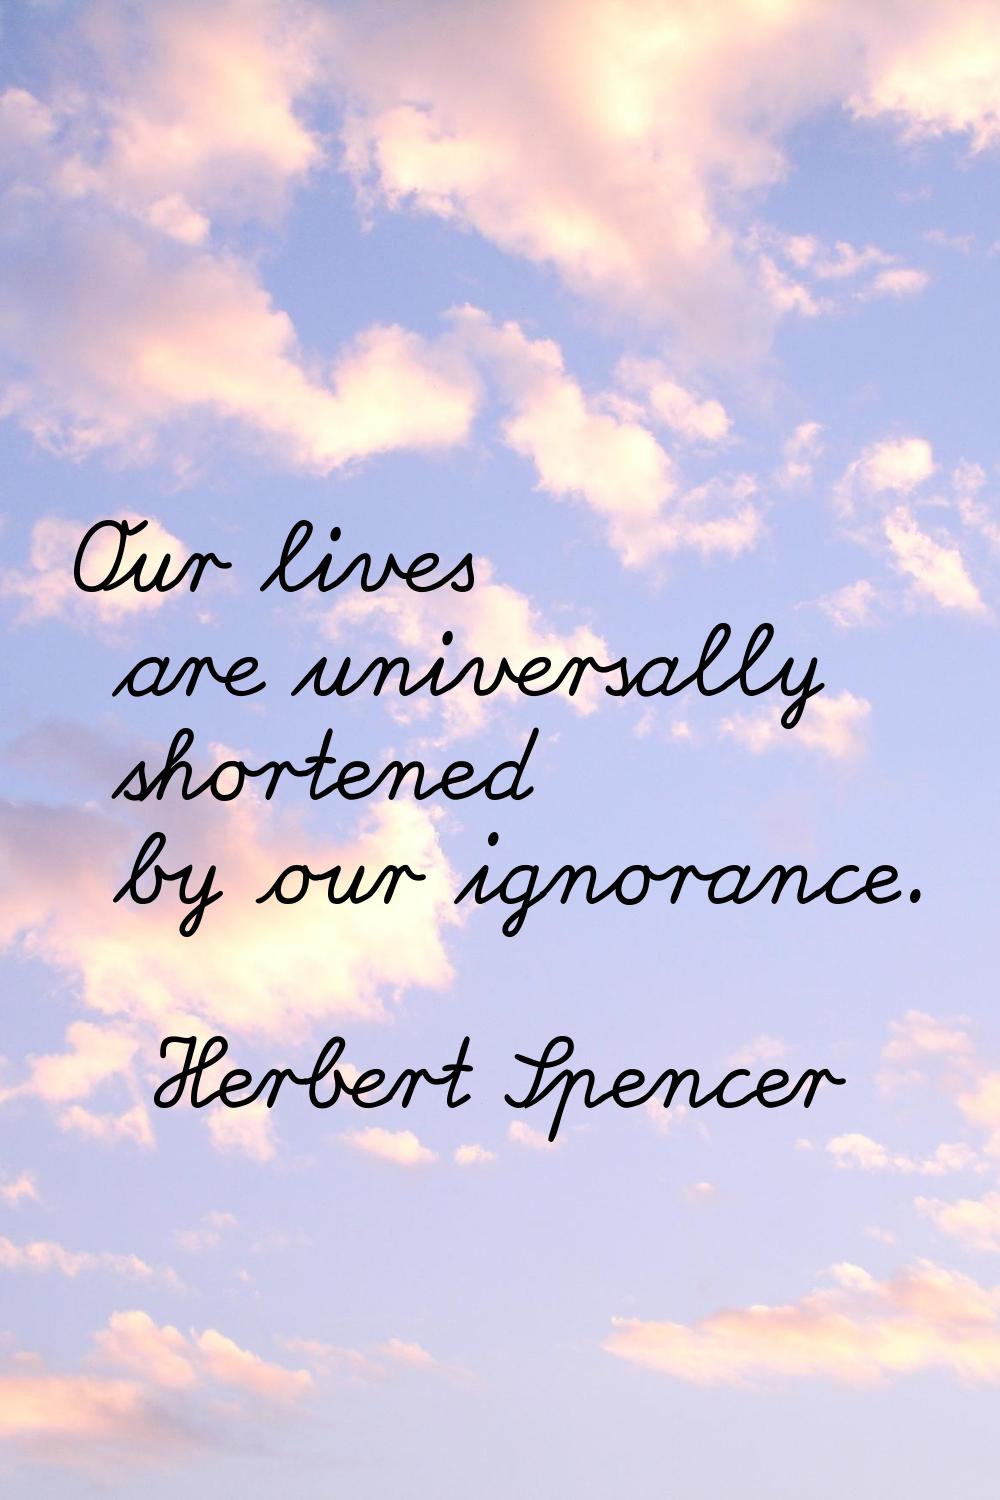 Our lives are universally shortened by our ignorance.